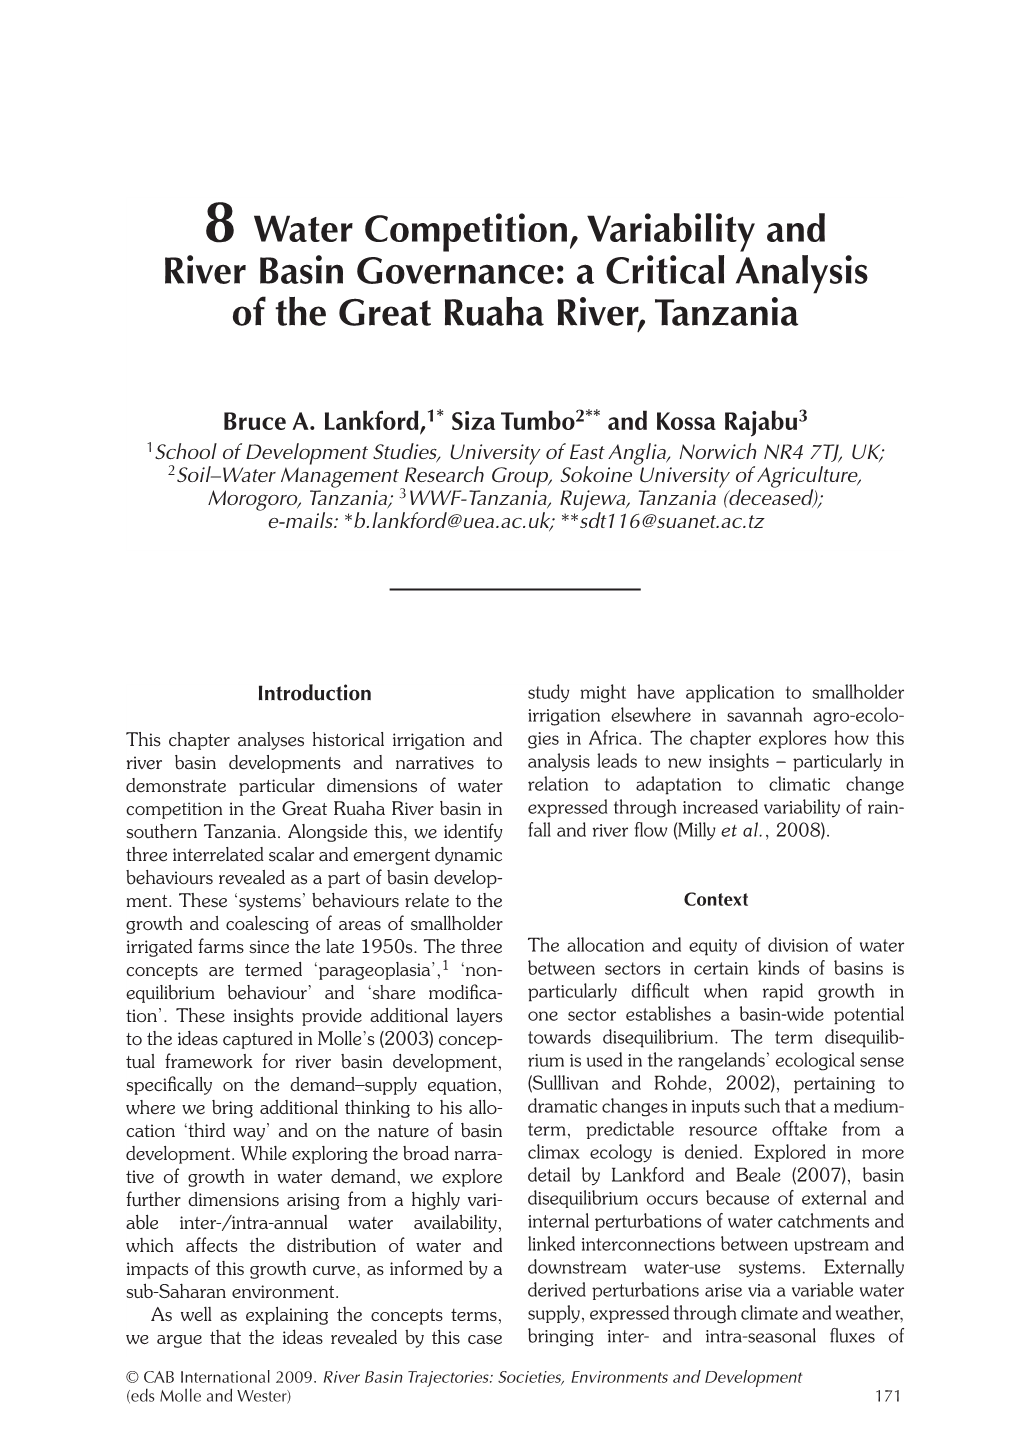 8 Water Competition, Variability and River Basin Governance: a Critical Analysis of the Great Ruaha River, Tanzania